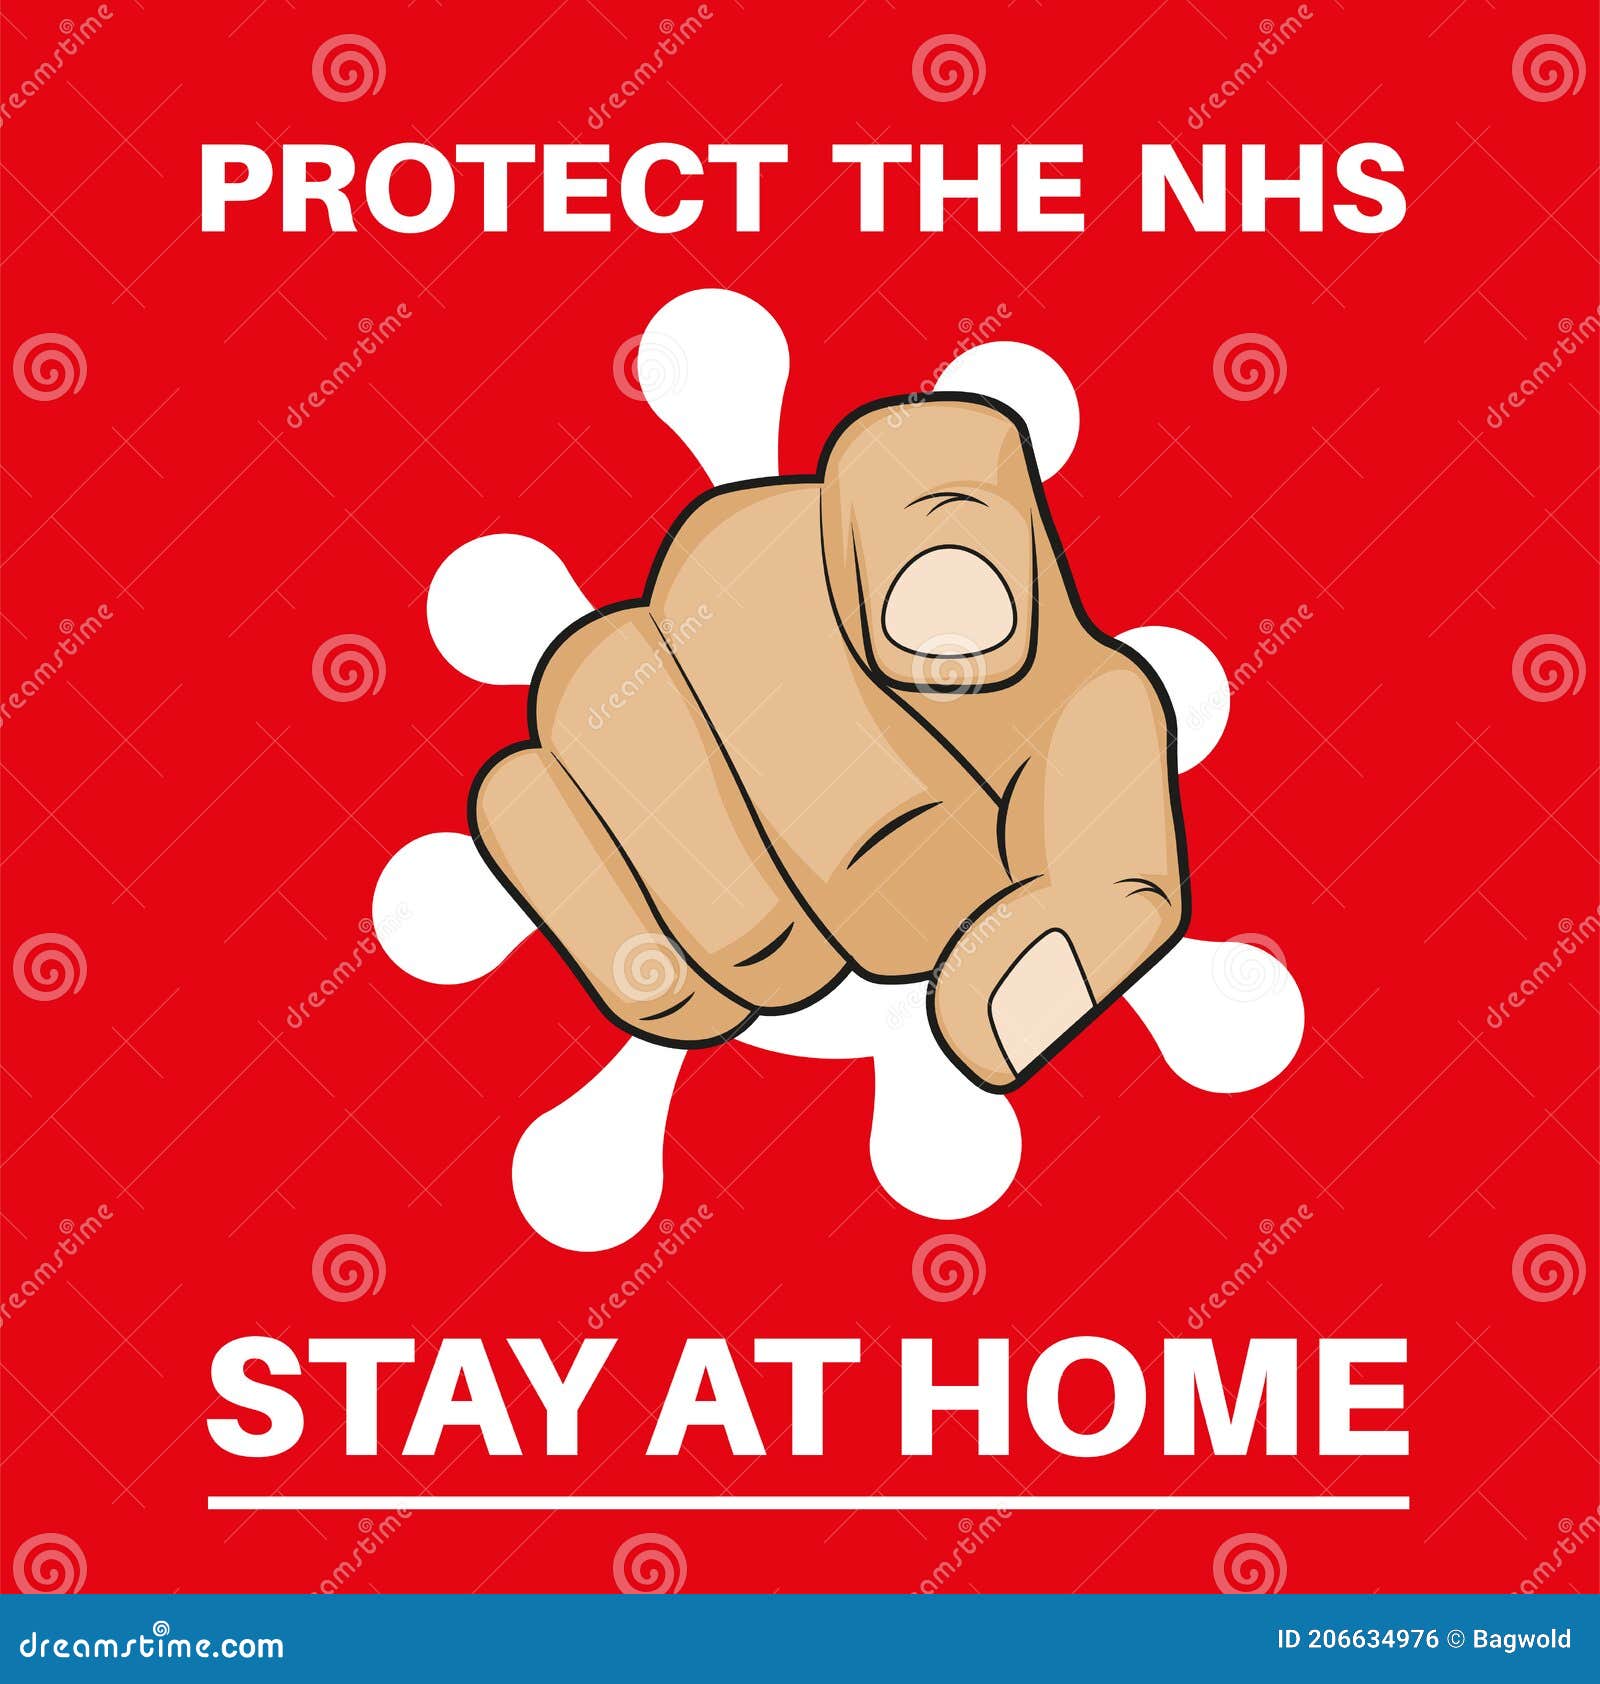 protect the nhs - stay at home pointing hand with covid logo   on a red background